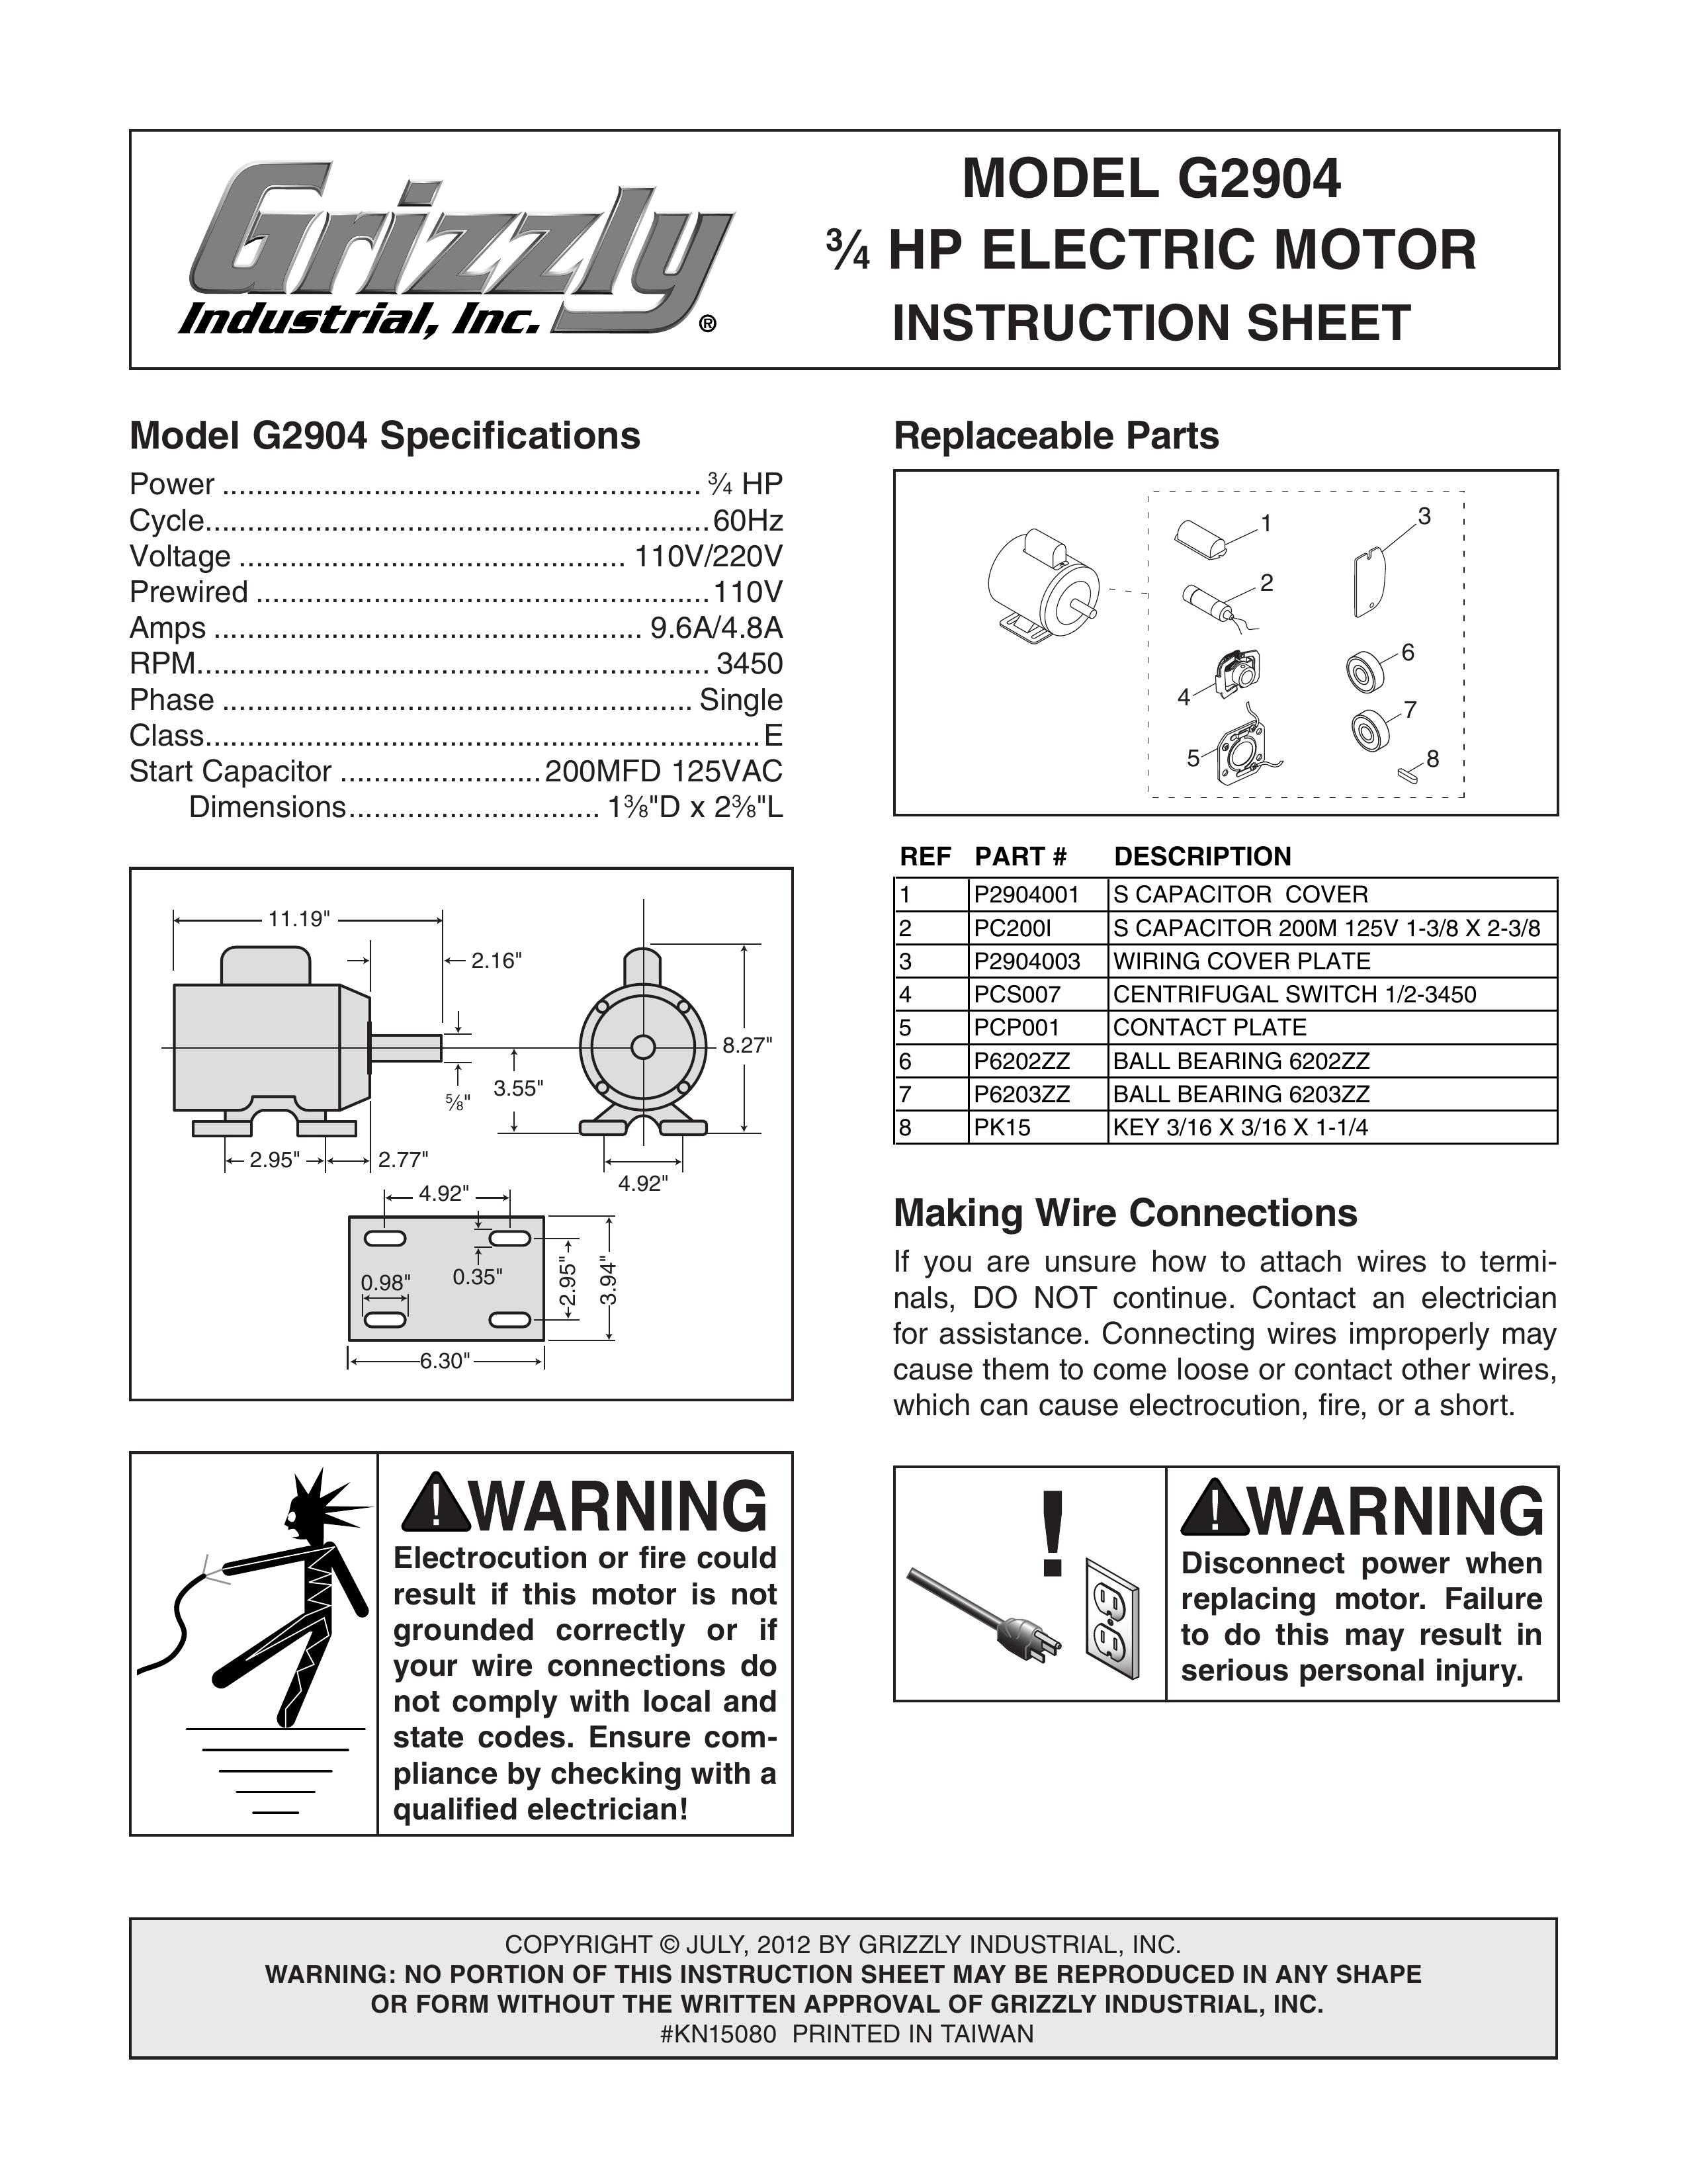 Grizzly G2904 Outboard Motor User Manual